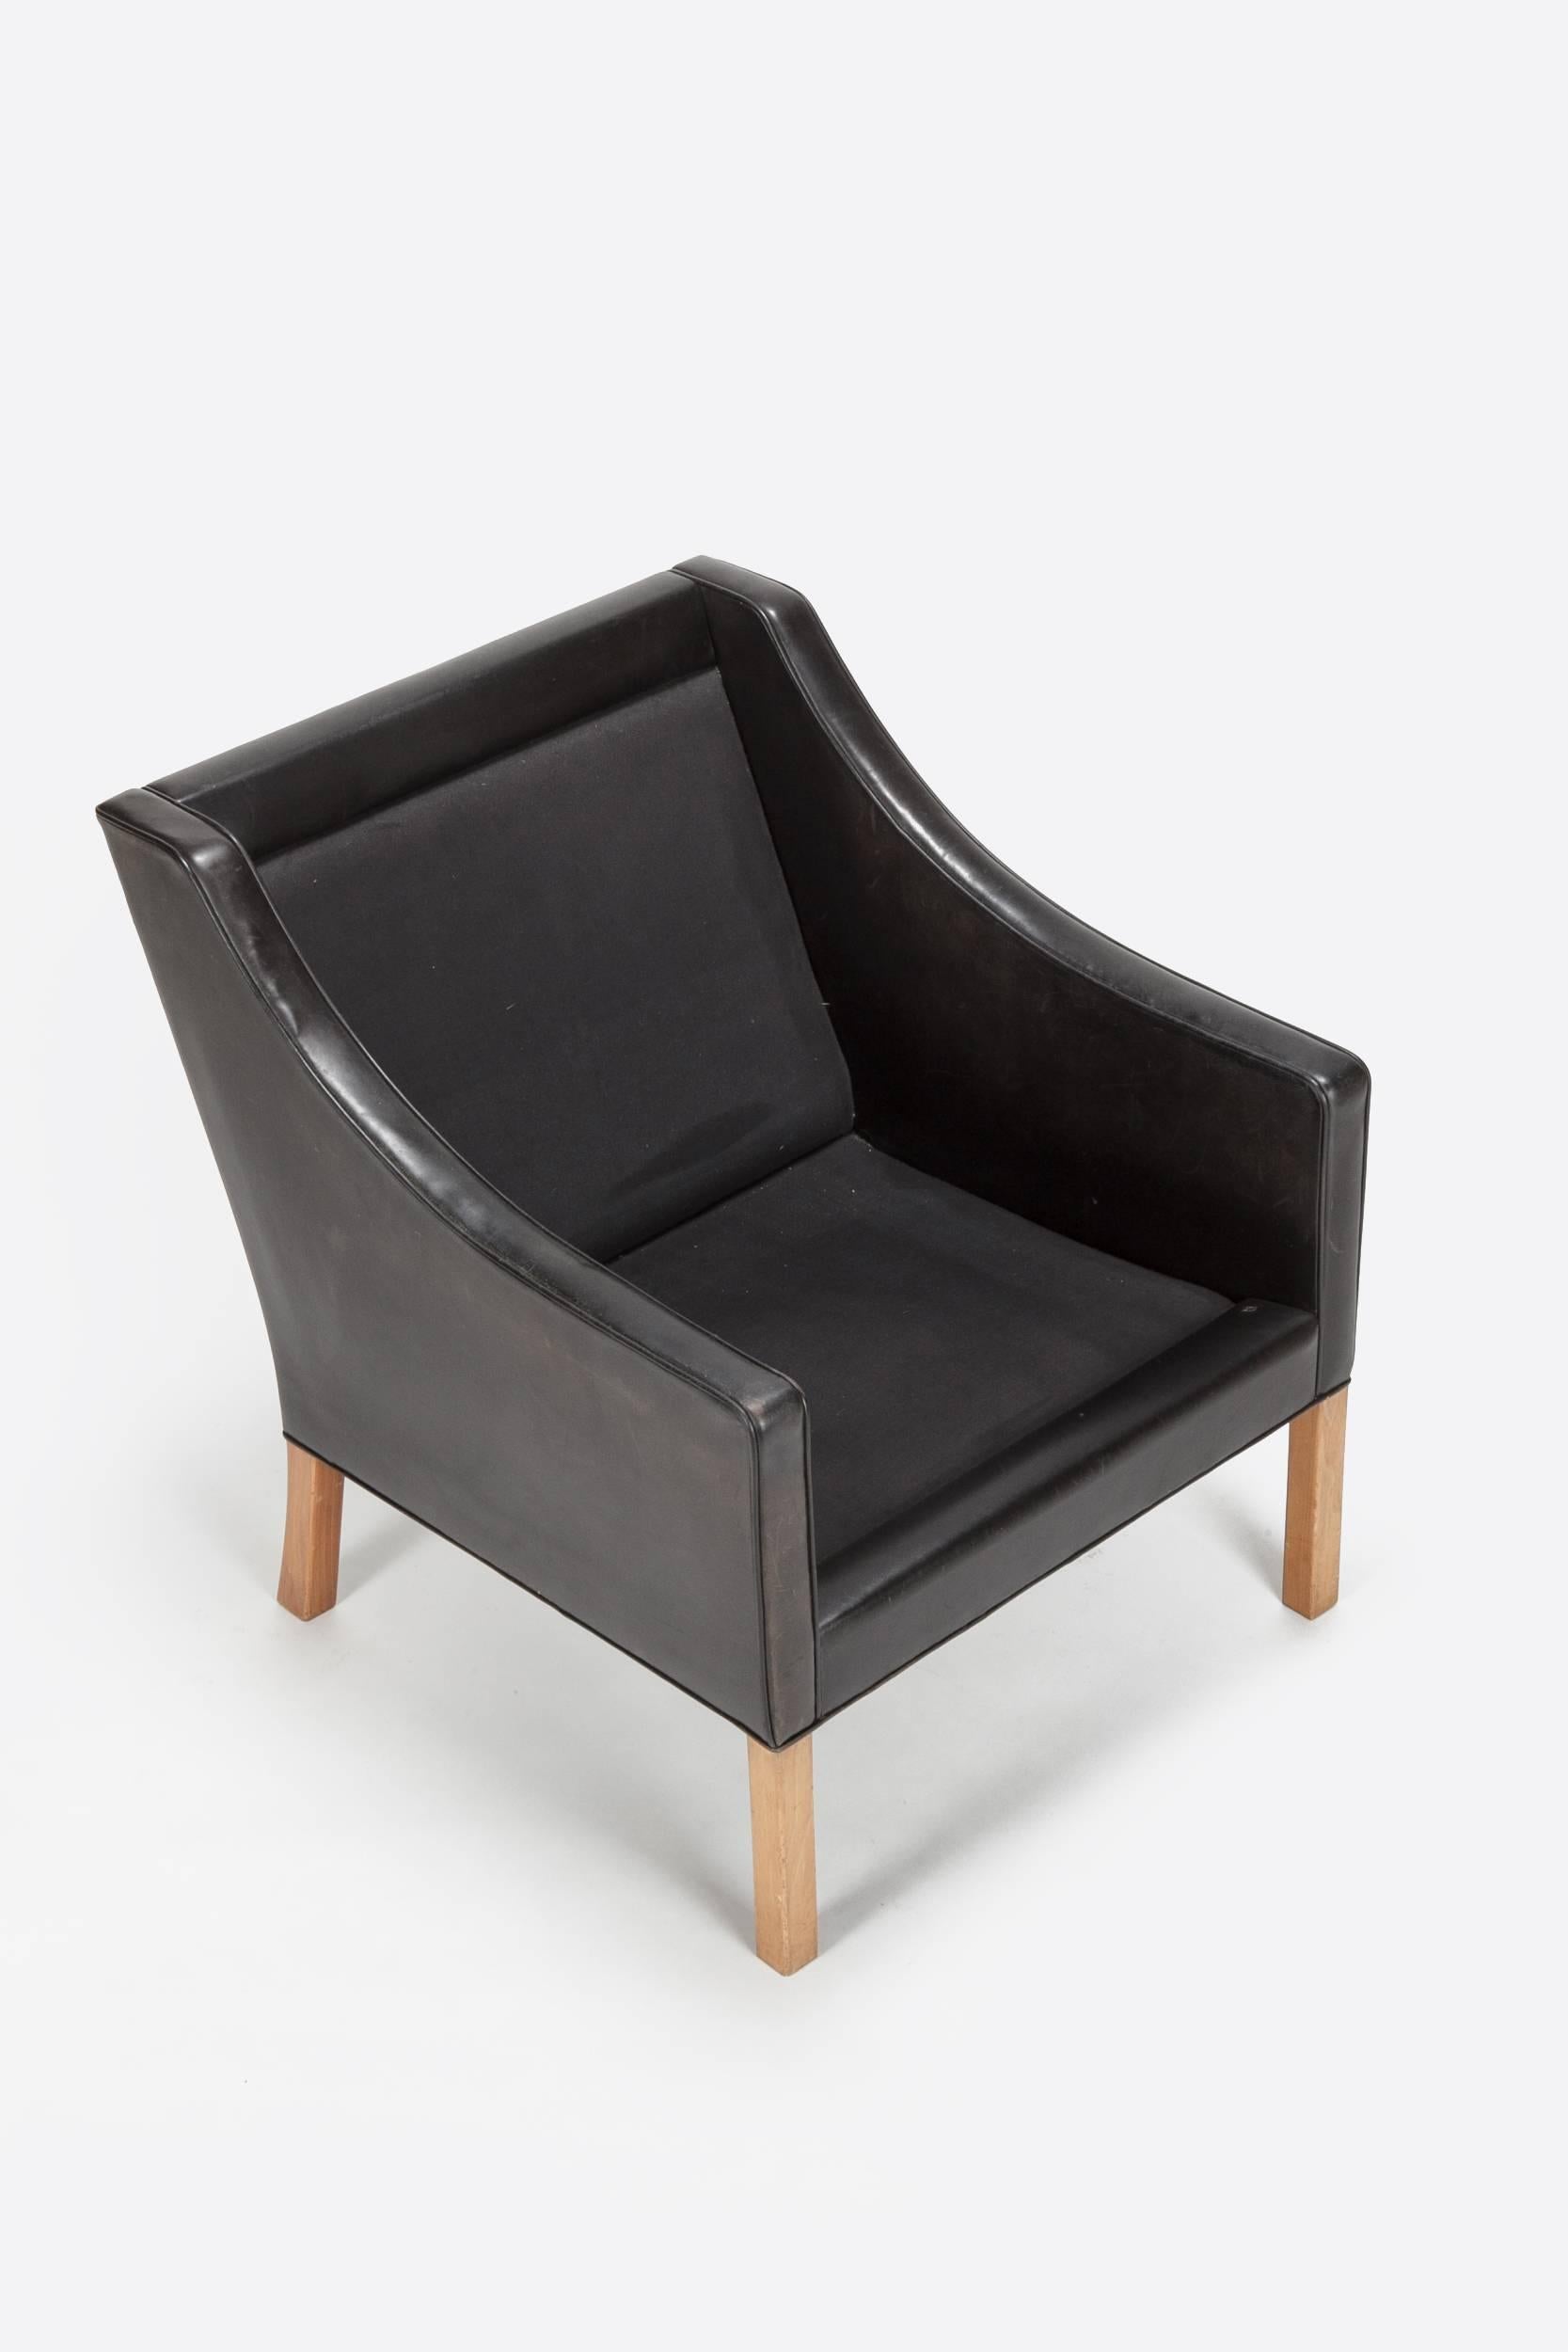 Leather Borge Mogensen Lounge Chair 2207 for Fredericia, 1963